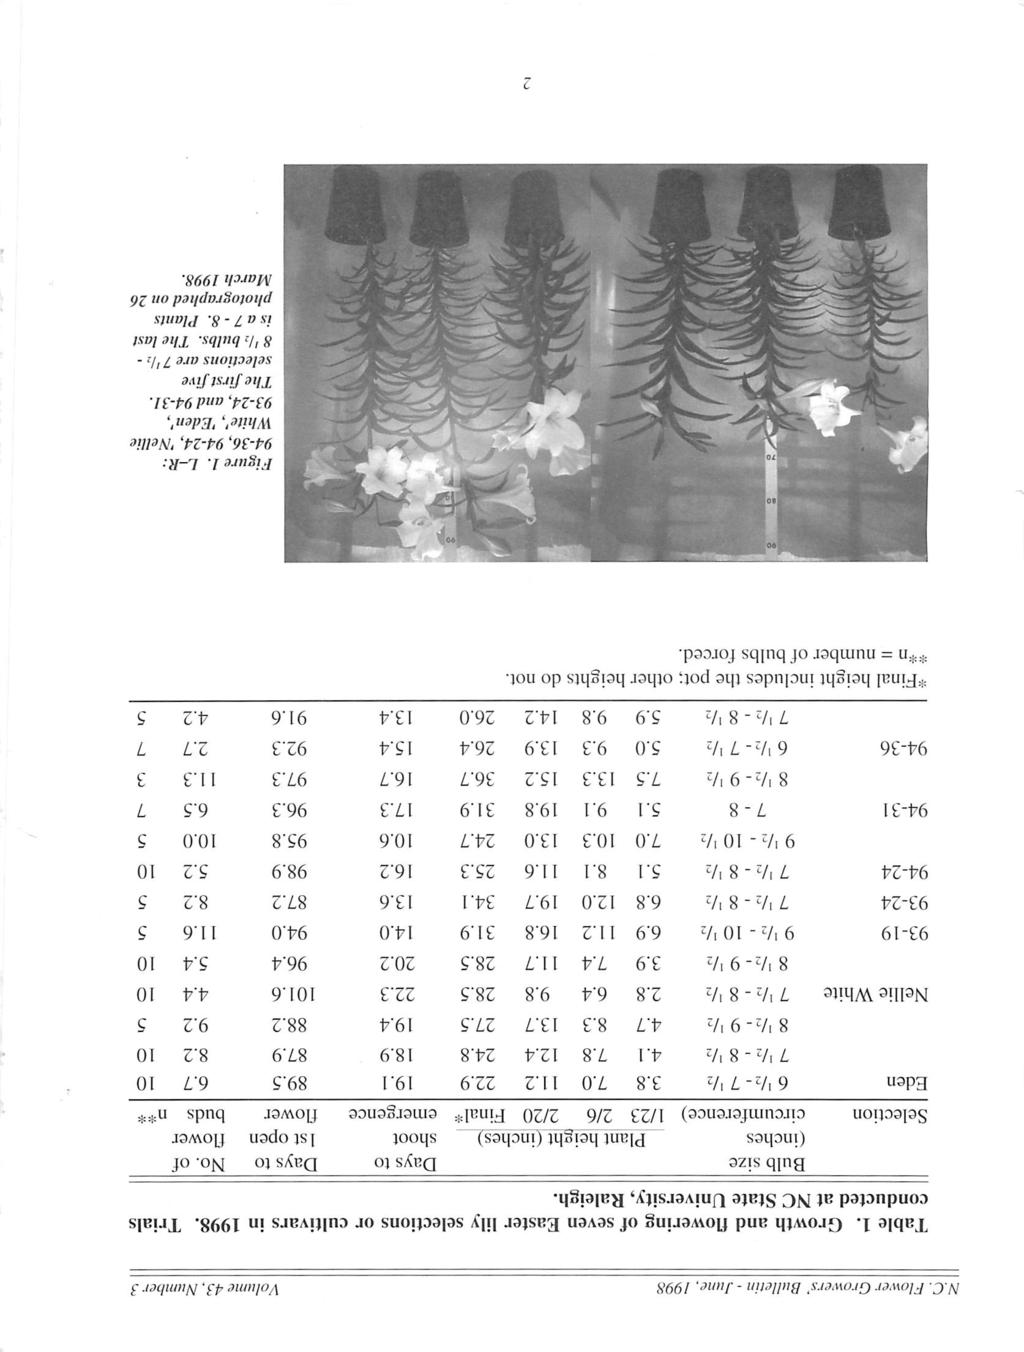 N.C. Flower Growers' Bulletin - June, 1998 Volume 43, Number 3 Table 1. Growth and flowering of seven Easter lily selections or cultivars in 1998. conducted at NC State University, Raleigh.